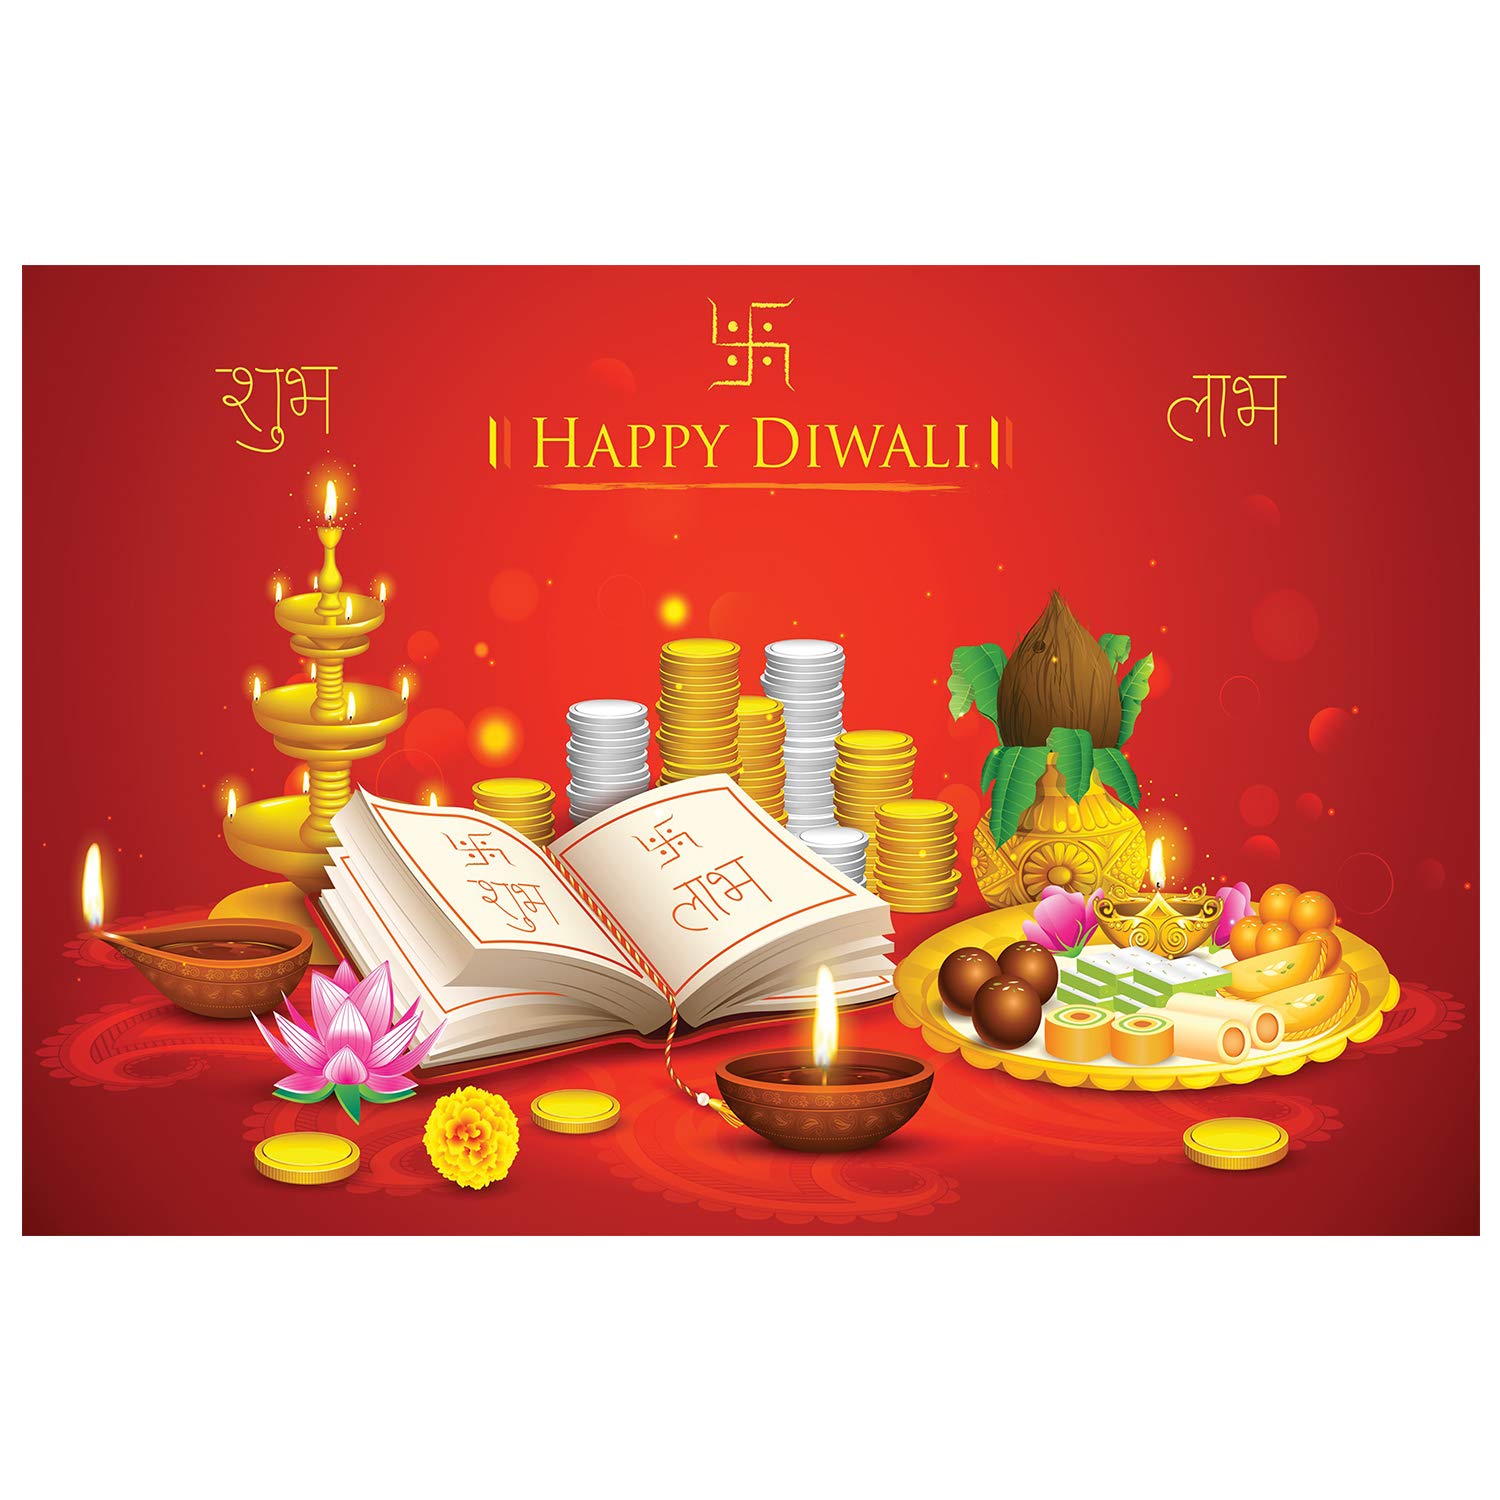 Buy happy diwali pooja festival decor wallpaper poster art wall decoration stickers for diwali occasion cm width x cm height onle at low prices dia